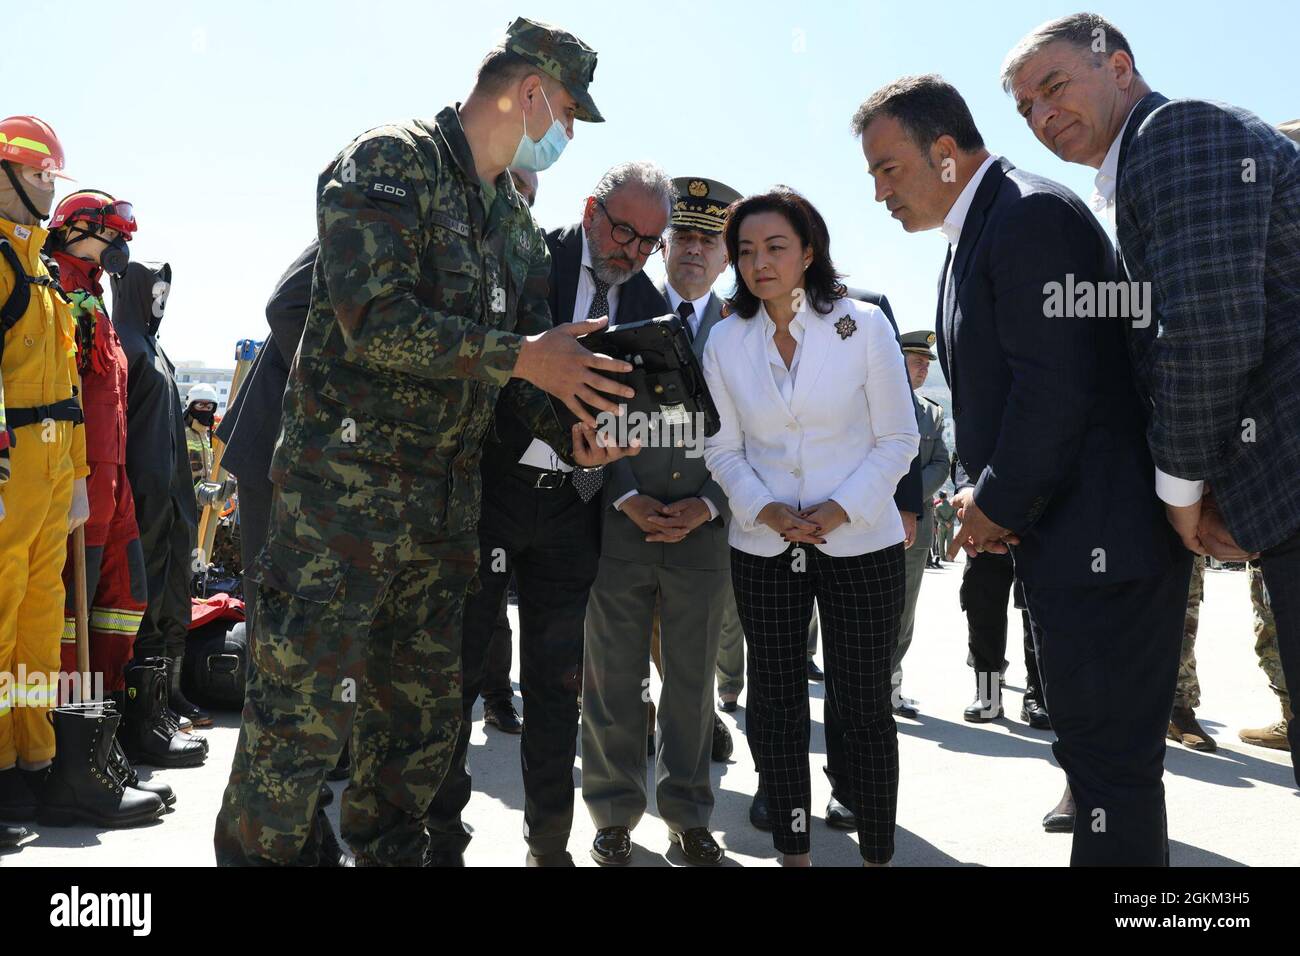 The Albanian Armed Forces Explosive Ordnance Disposal (EOD) unit shows U.S.-donated equipment to U.S. Ambassador to Albania Yuri Kim May 22, 2021, at a military sponsored open house in Vlore, Albania, held as part of DEFENDER-Europe 21 activities.  During the event, U.S. Ambassador to Albania Yuri Kim was briefed on the equipment and the continued U.S. commitment to peace and security in Albania, which includes decontamination of landmine and unexploded ordnance sites left over from previous conflict here. DEFENDER-Europe 21 is a large-scale U.S. Army-led exercise designed to build readiness a Stock Photo